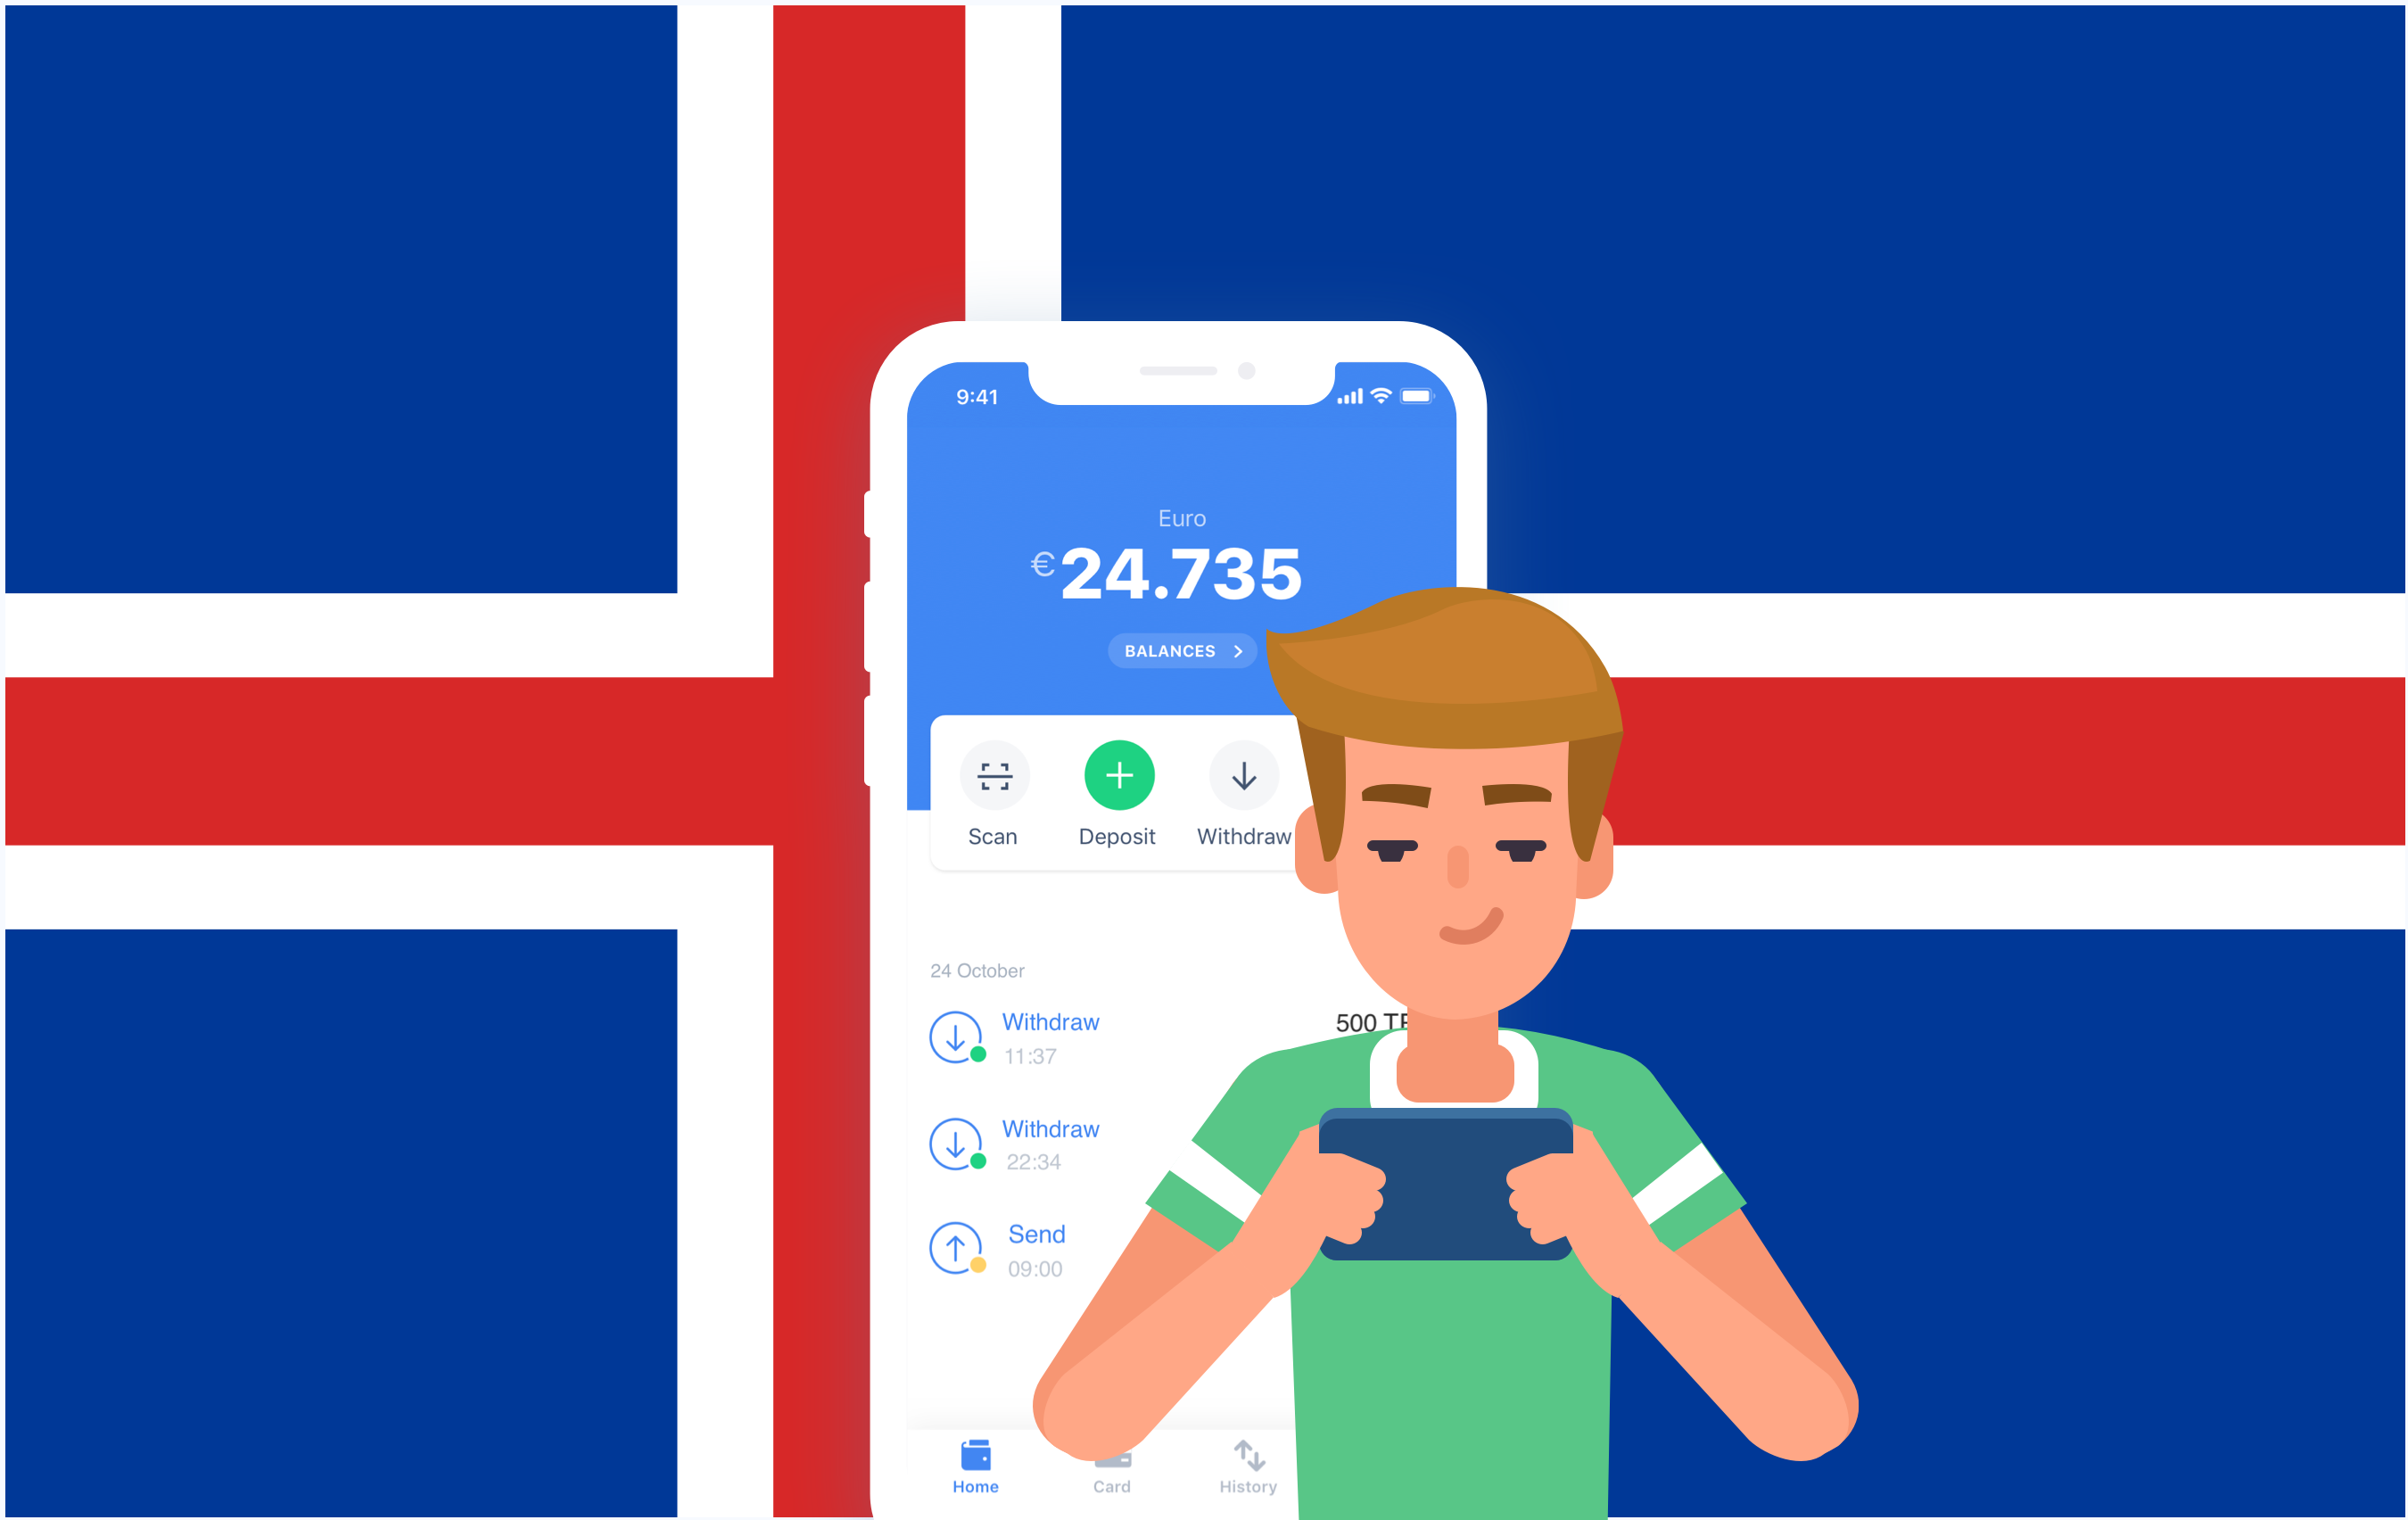 How to send money to Iceland